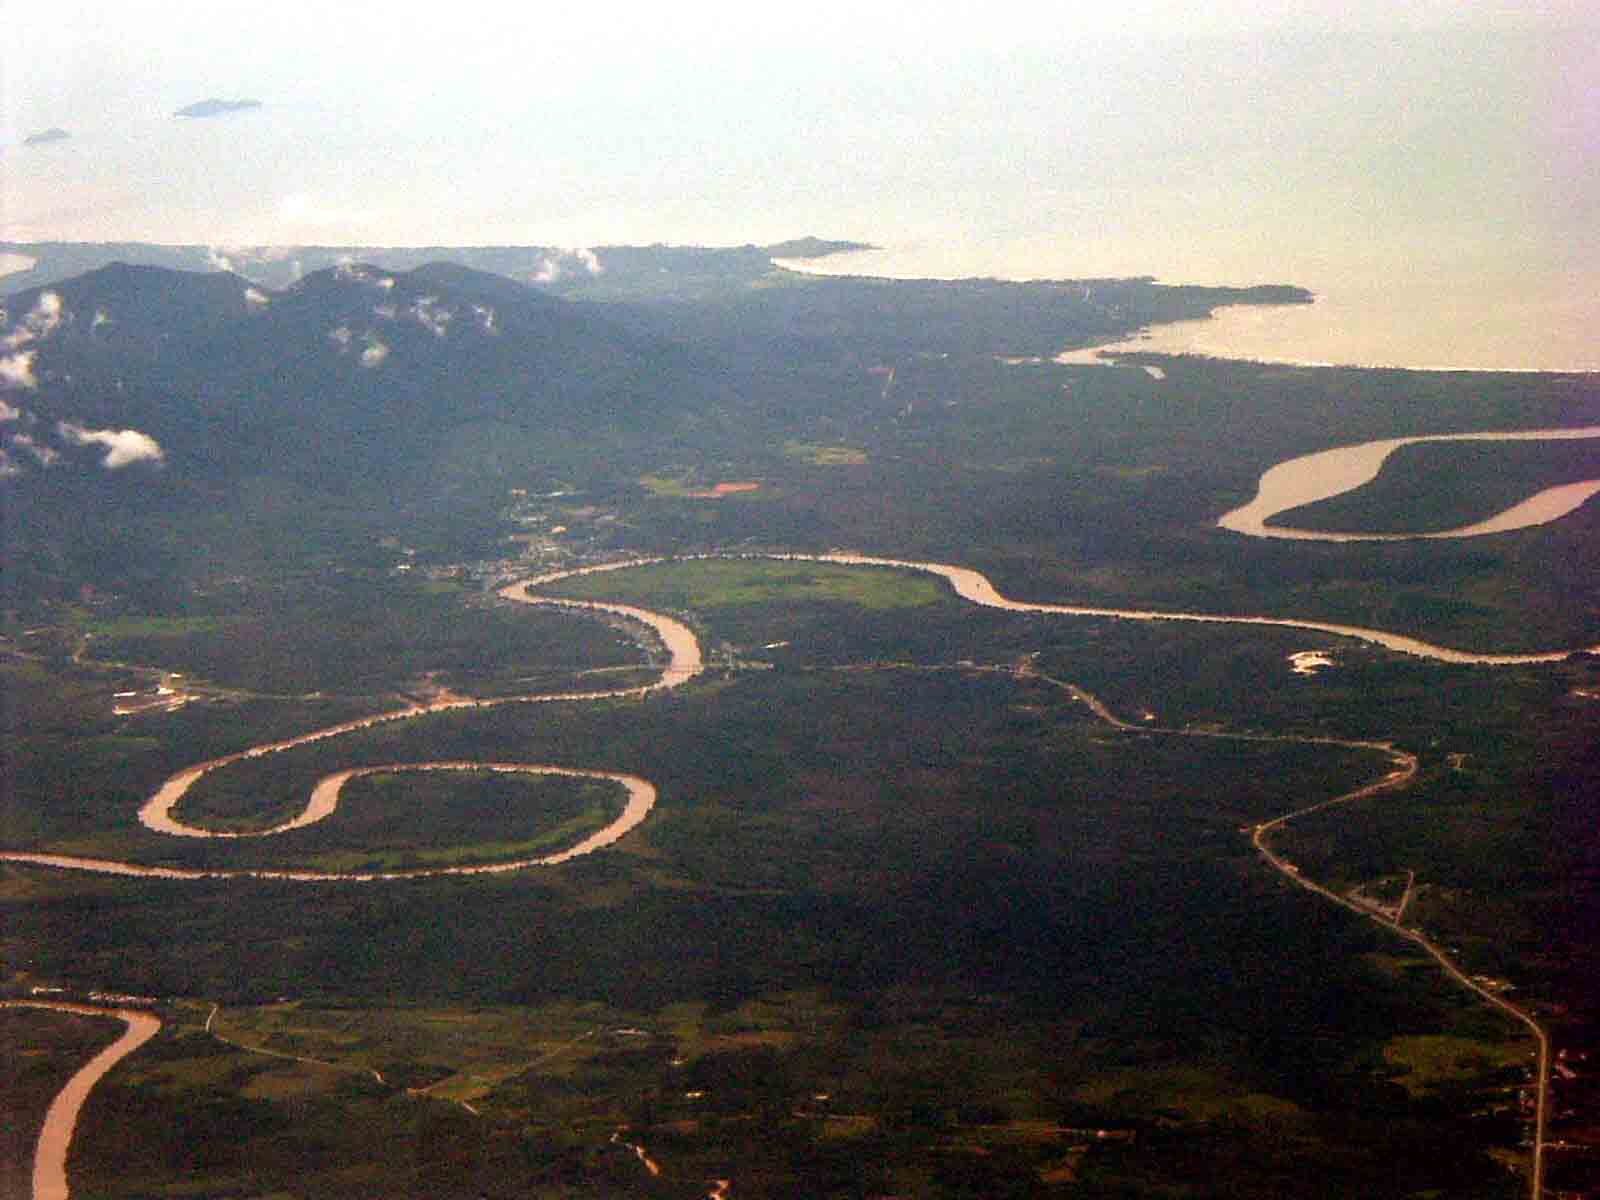 Lundu area from airliner